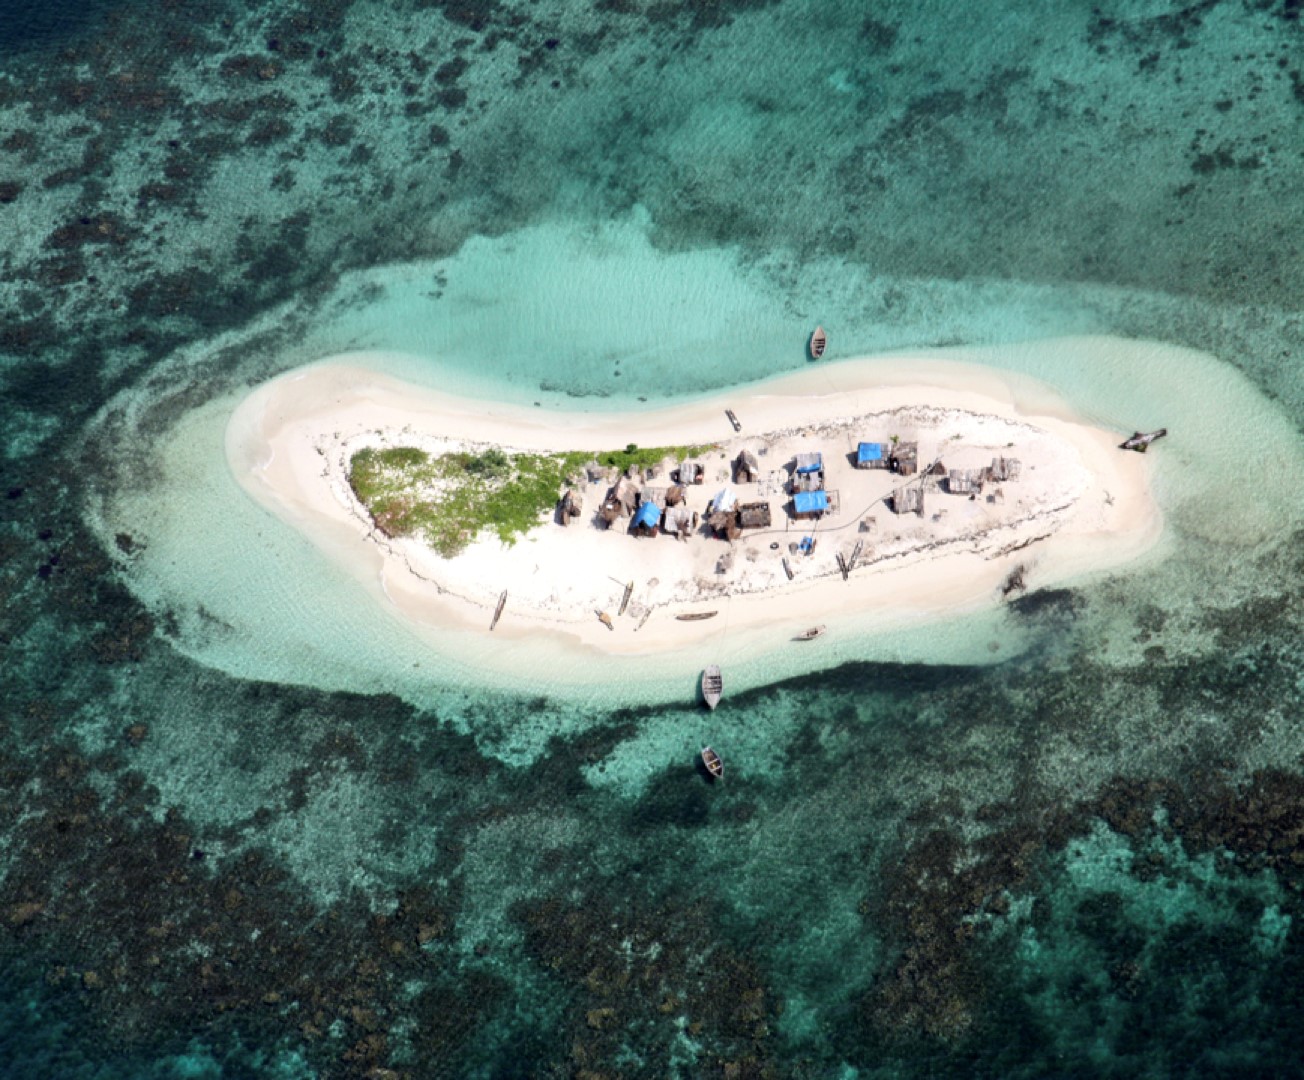 Figure 6. Aerial view of one islet along the coastline of Southern Haiti. It shows the high exposure of a community living without protection at sea level. Photo by Antonio Perera.